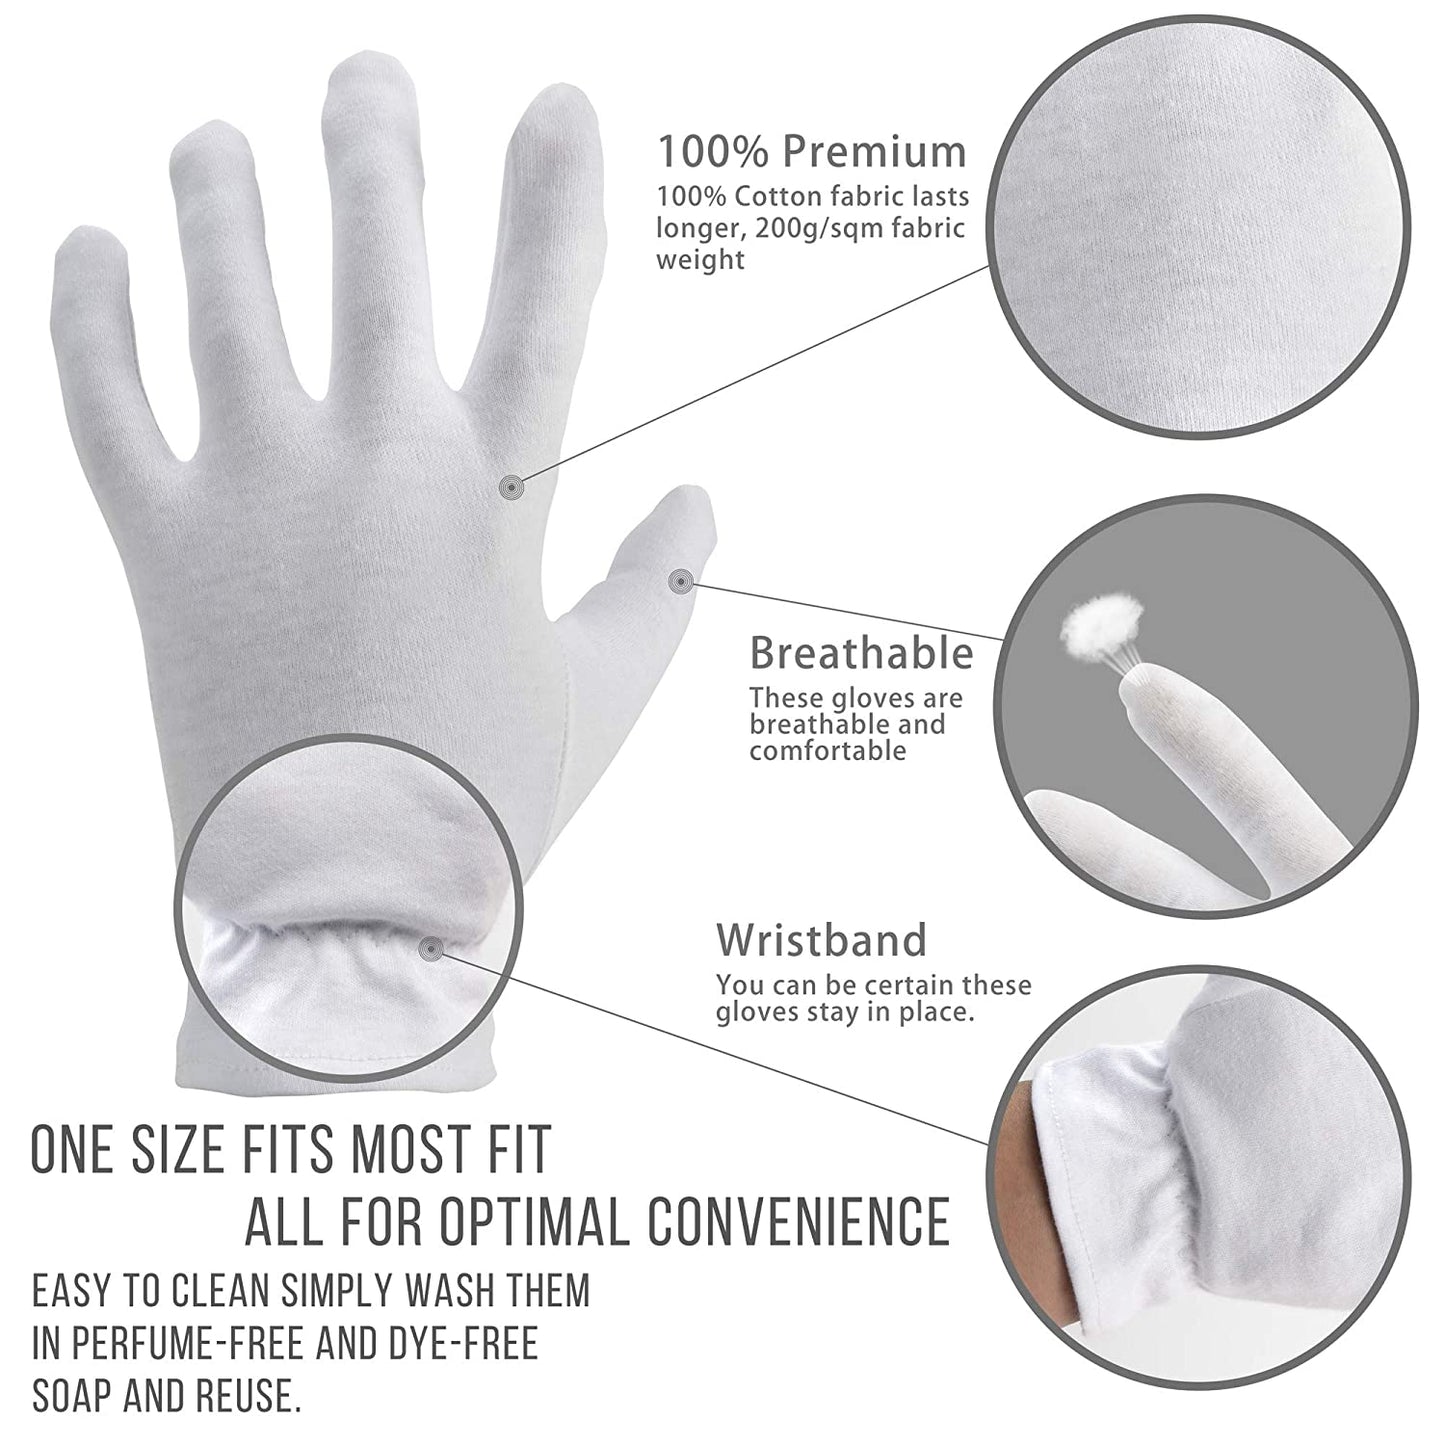 Custom Logo Cotton Gloves Protects From Dust, Pollution And Cold - Washable & Reusable